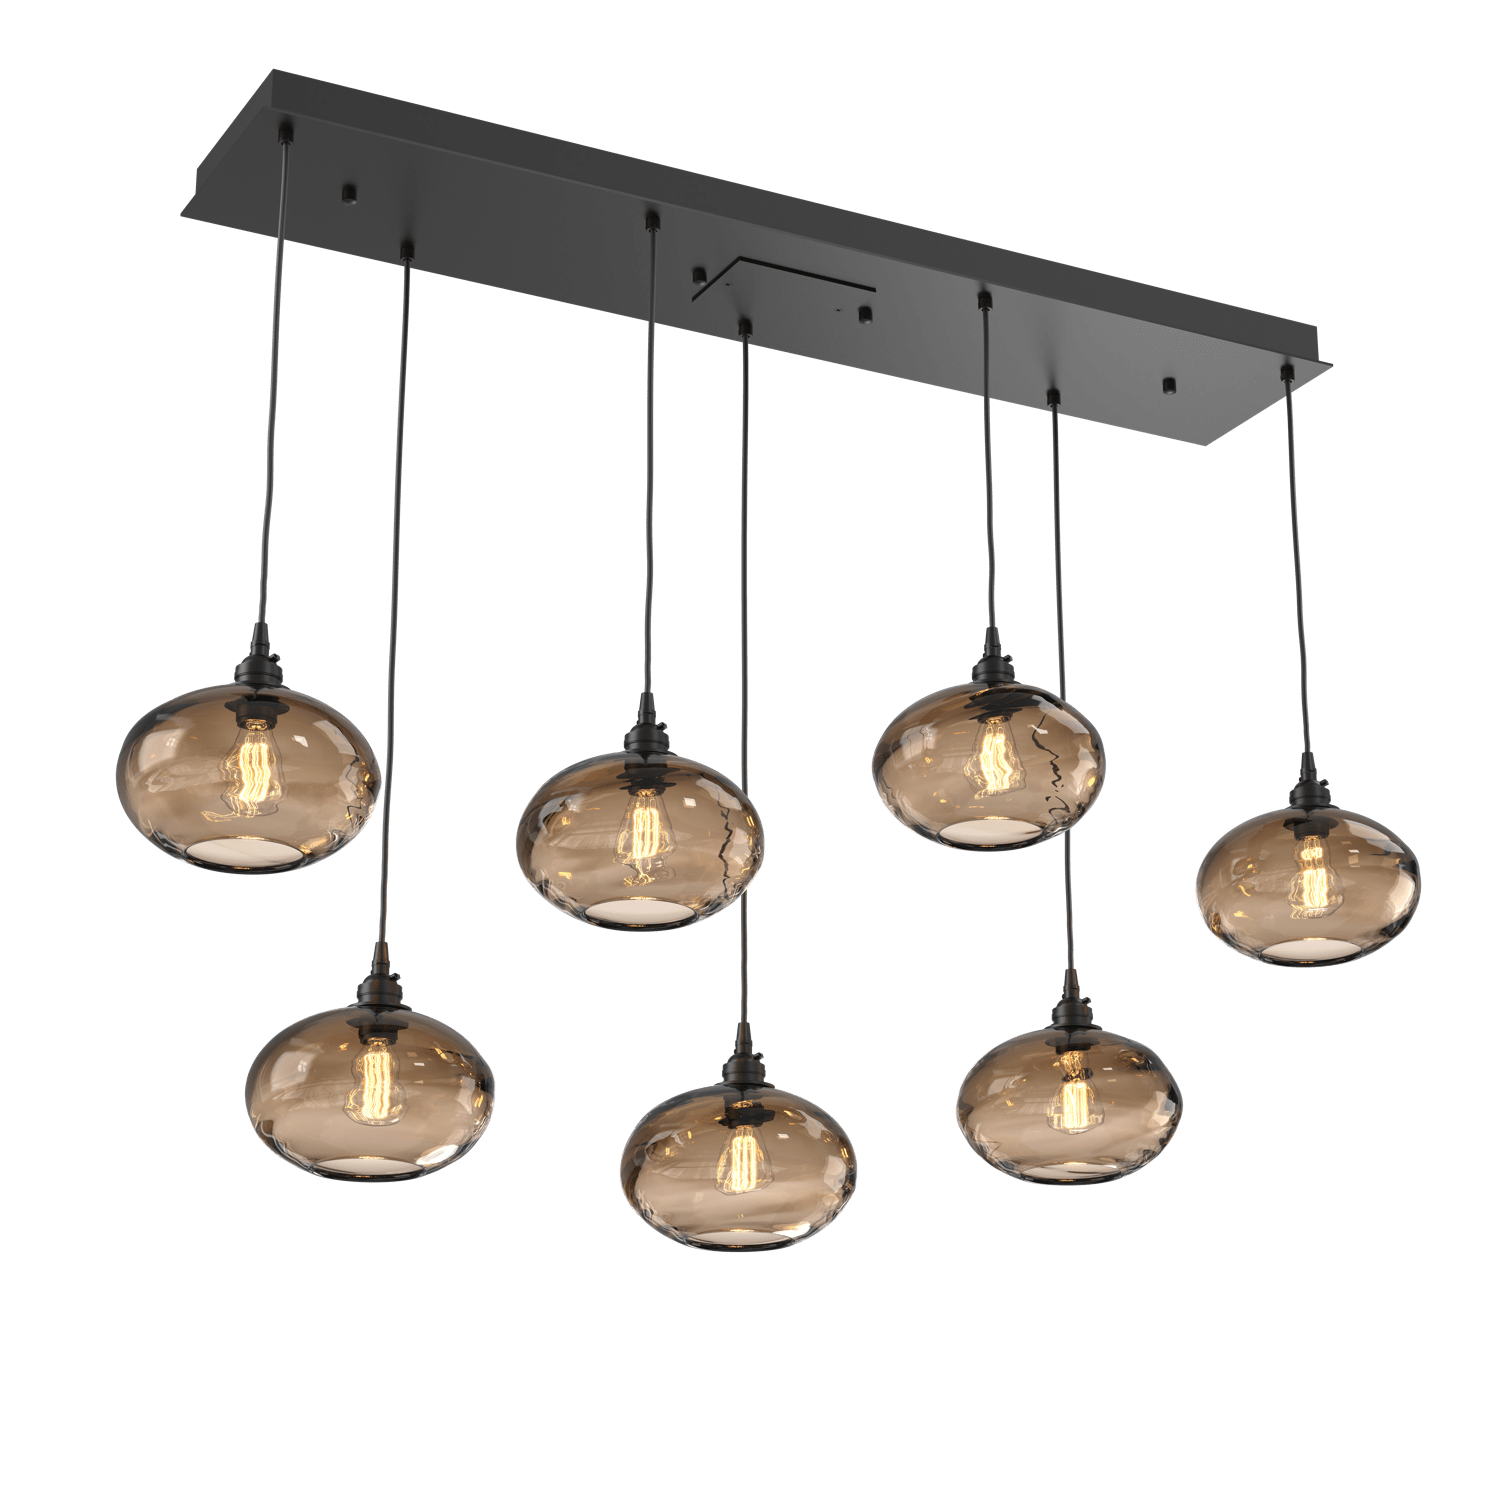 PLB0036-07-MB-OB-Hammerton-Studio-Optic-Blown-Glass-Coppa-7-light-linear-pendant-chandelier-with-matte-black-finish-and-optic-bronze-blown-glass-shades-and-incandescent-lamping